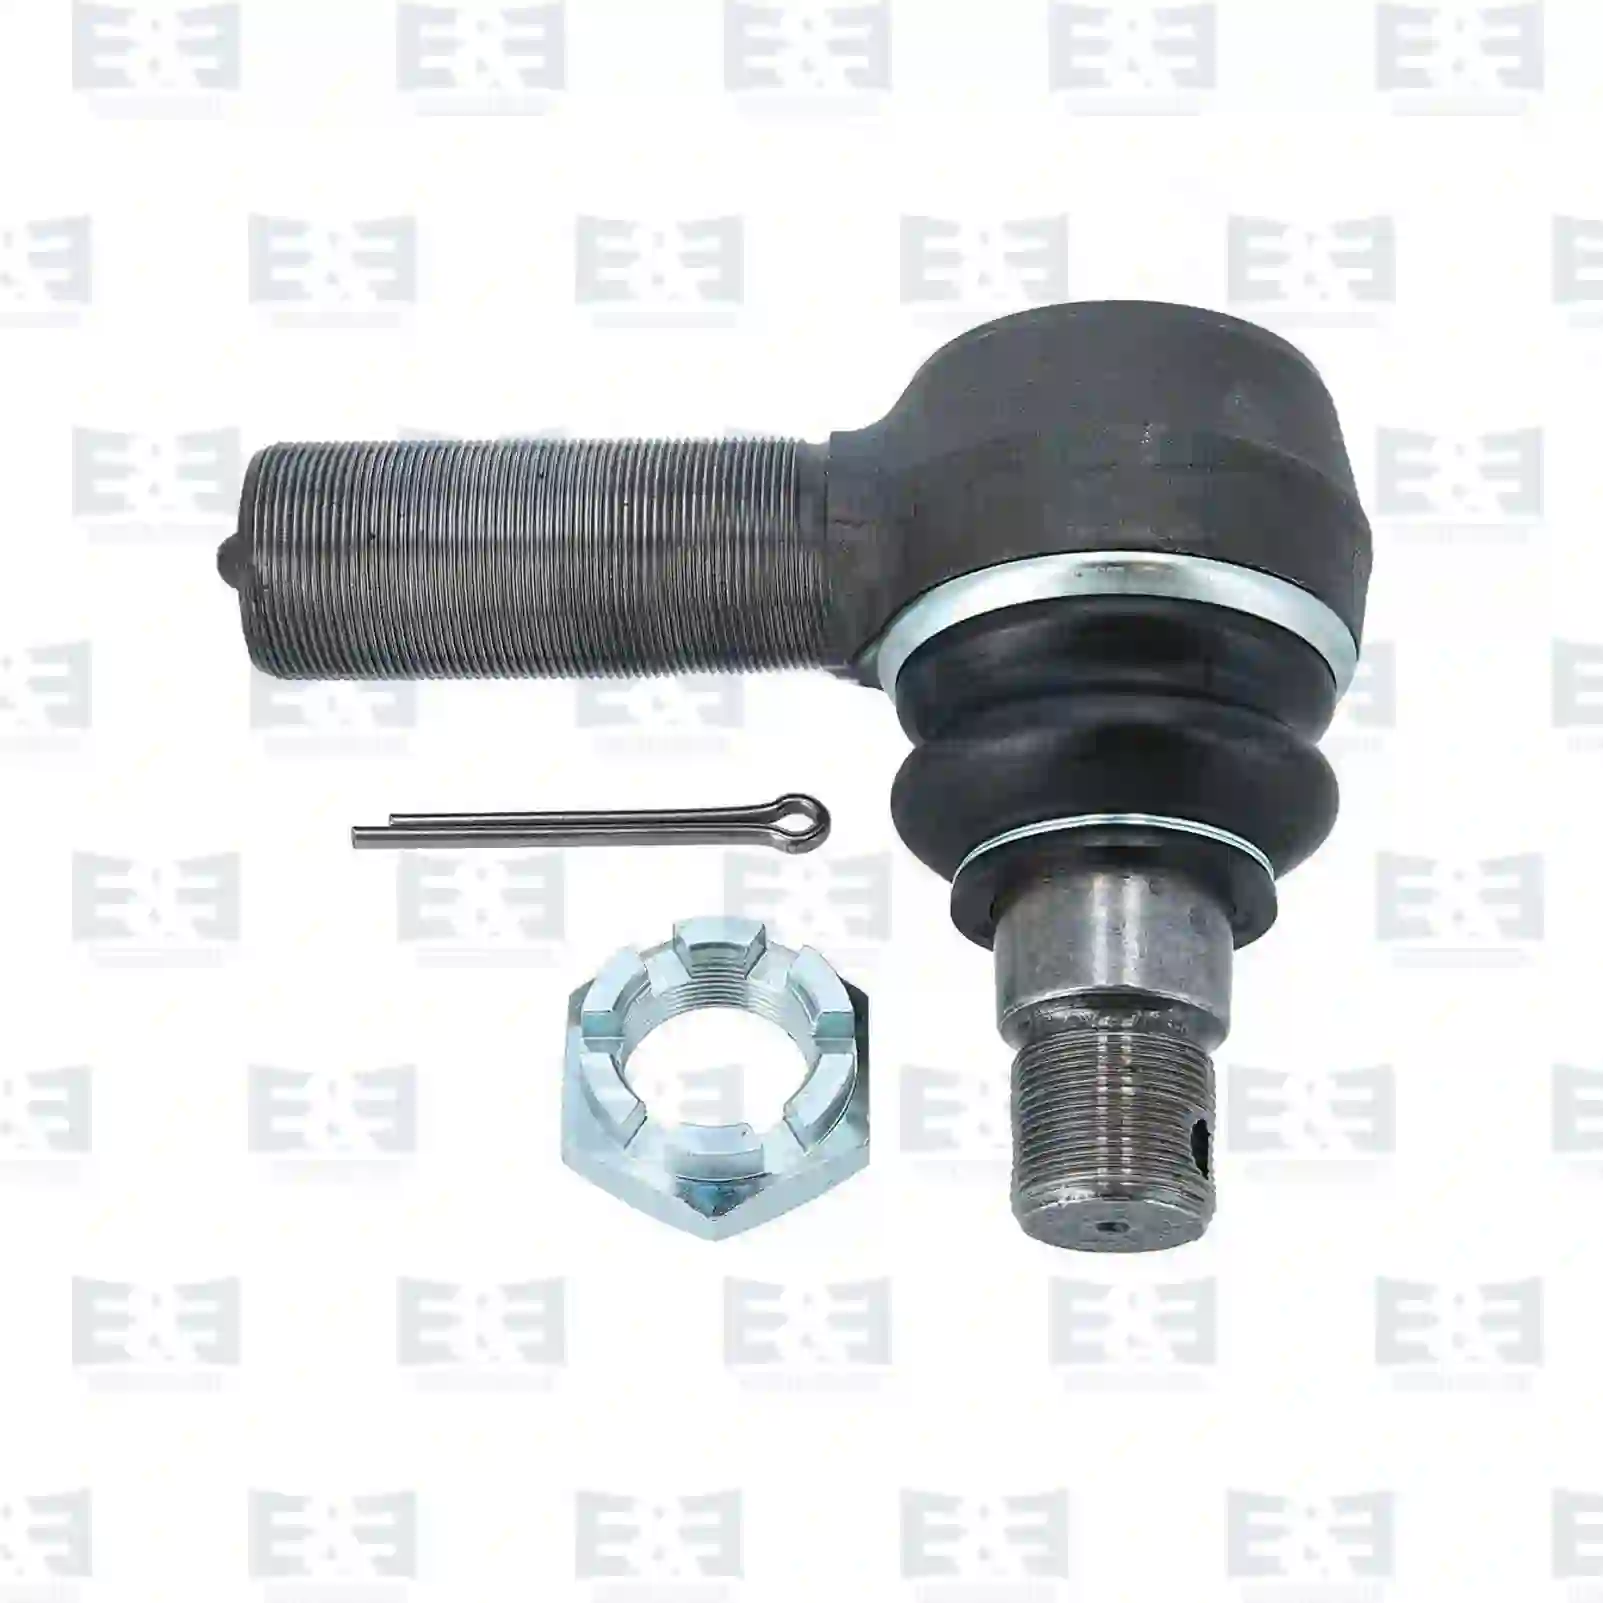 Ball joint, right hand thread, 2E2205738, 00101347, 00113251, 98133359, 0218081200, 634303130, 0697221, 697221, F4560S, 8408377, 99707030168, 99708408377, 01686516, 81953016295, 81953016297, 0004601748, 120322305, 53X001A, 2205000400, 6851491000, 5605300511, ZG40392-0008 ||  2E2205738 E&E Truck Spare Parts | Truck Spare Parts, Auotomotive Spare Parts Ball joint, right hand thread, 2E2205738, 00101347, 00113251, 98133359, 0218081200, 634303130, 0697221, 697221, F4560S, 8408377, 99707030168, 99708408377, 01686516, 81953016295, 81953016297, 0004601748, 120322305, 53X001A, 2205000400, 6851491000, 5605300511, ZG40392-0008 ||  2E2205738 E&E Truck Spare Parts | Truck Spare Parts, Auotomotive Spare Parts